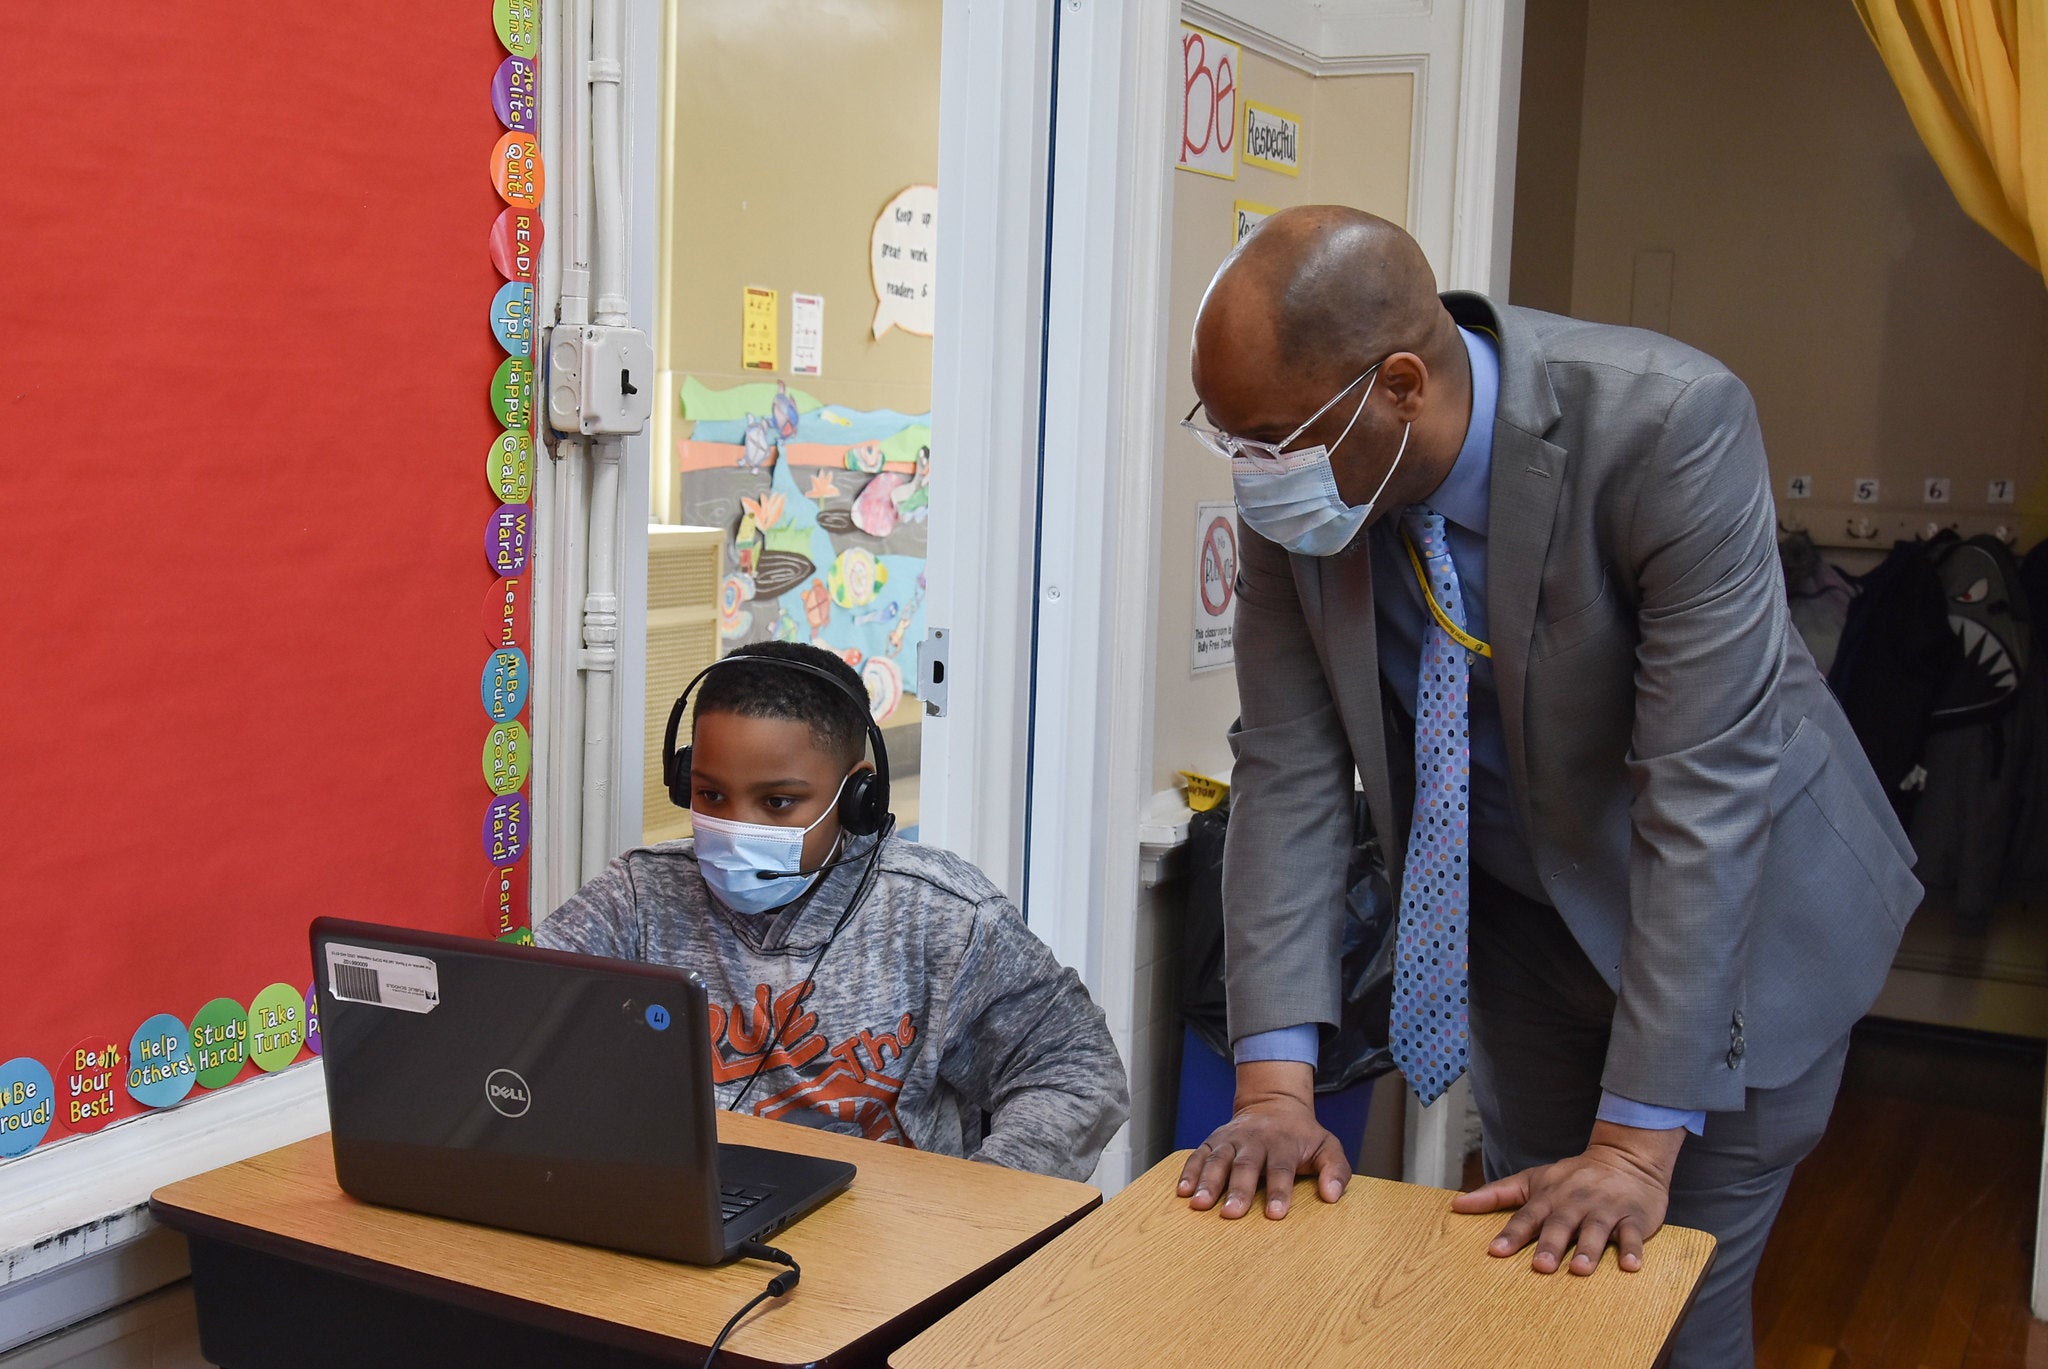 A teacher and student in masks look at a laptop screen.